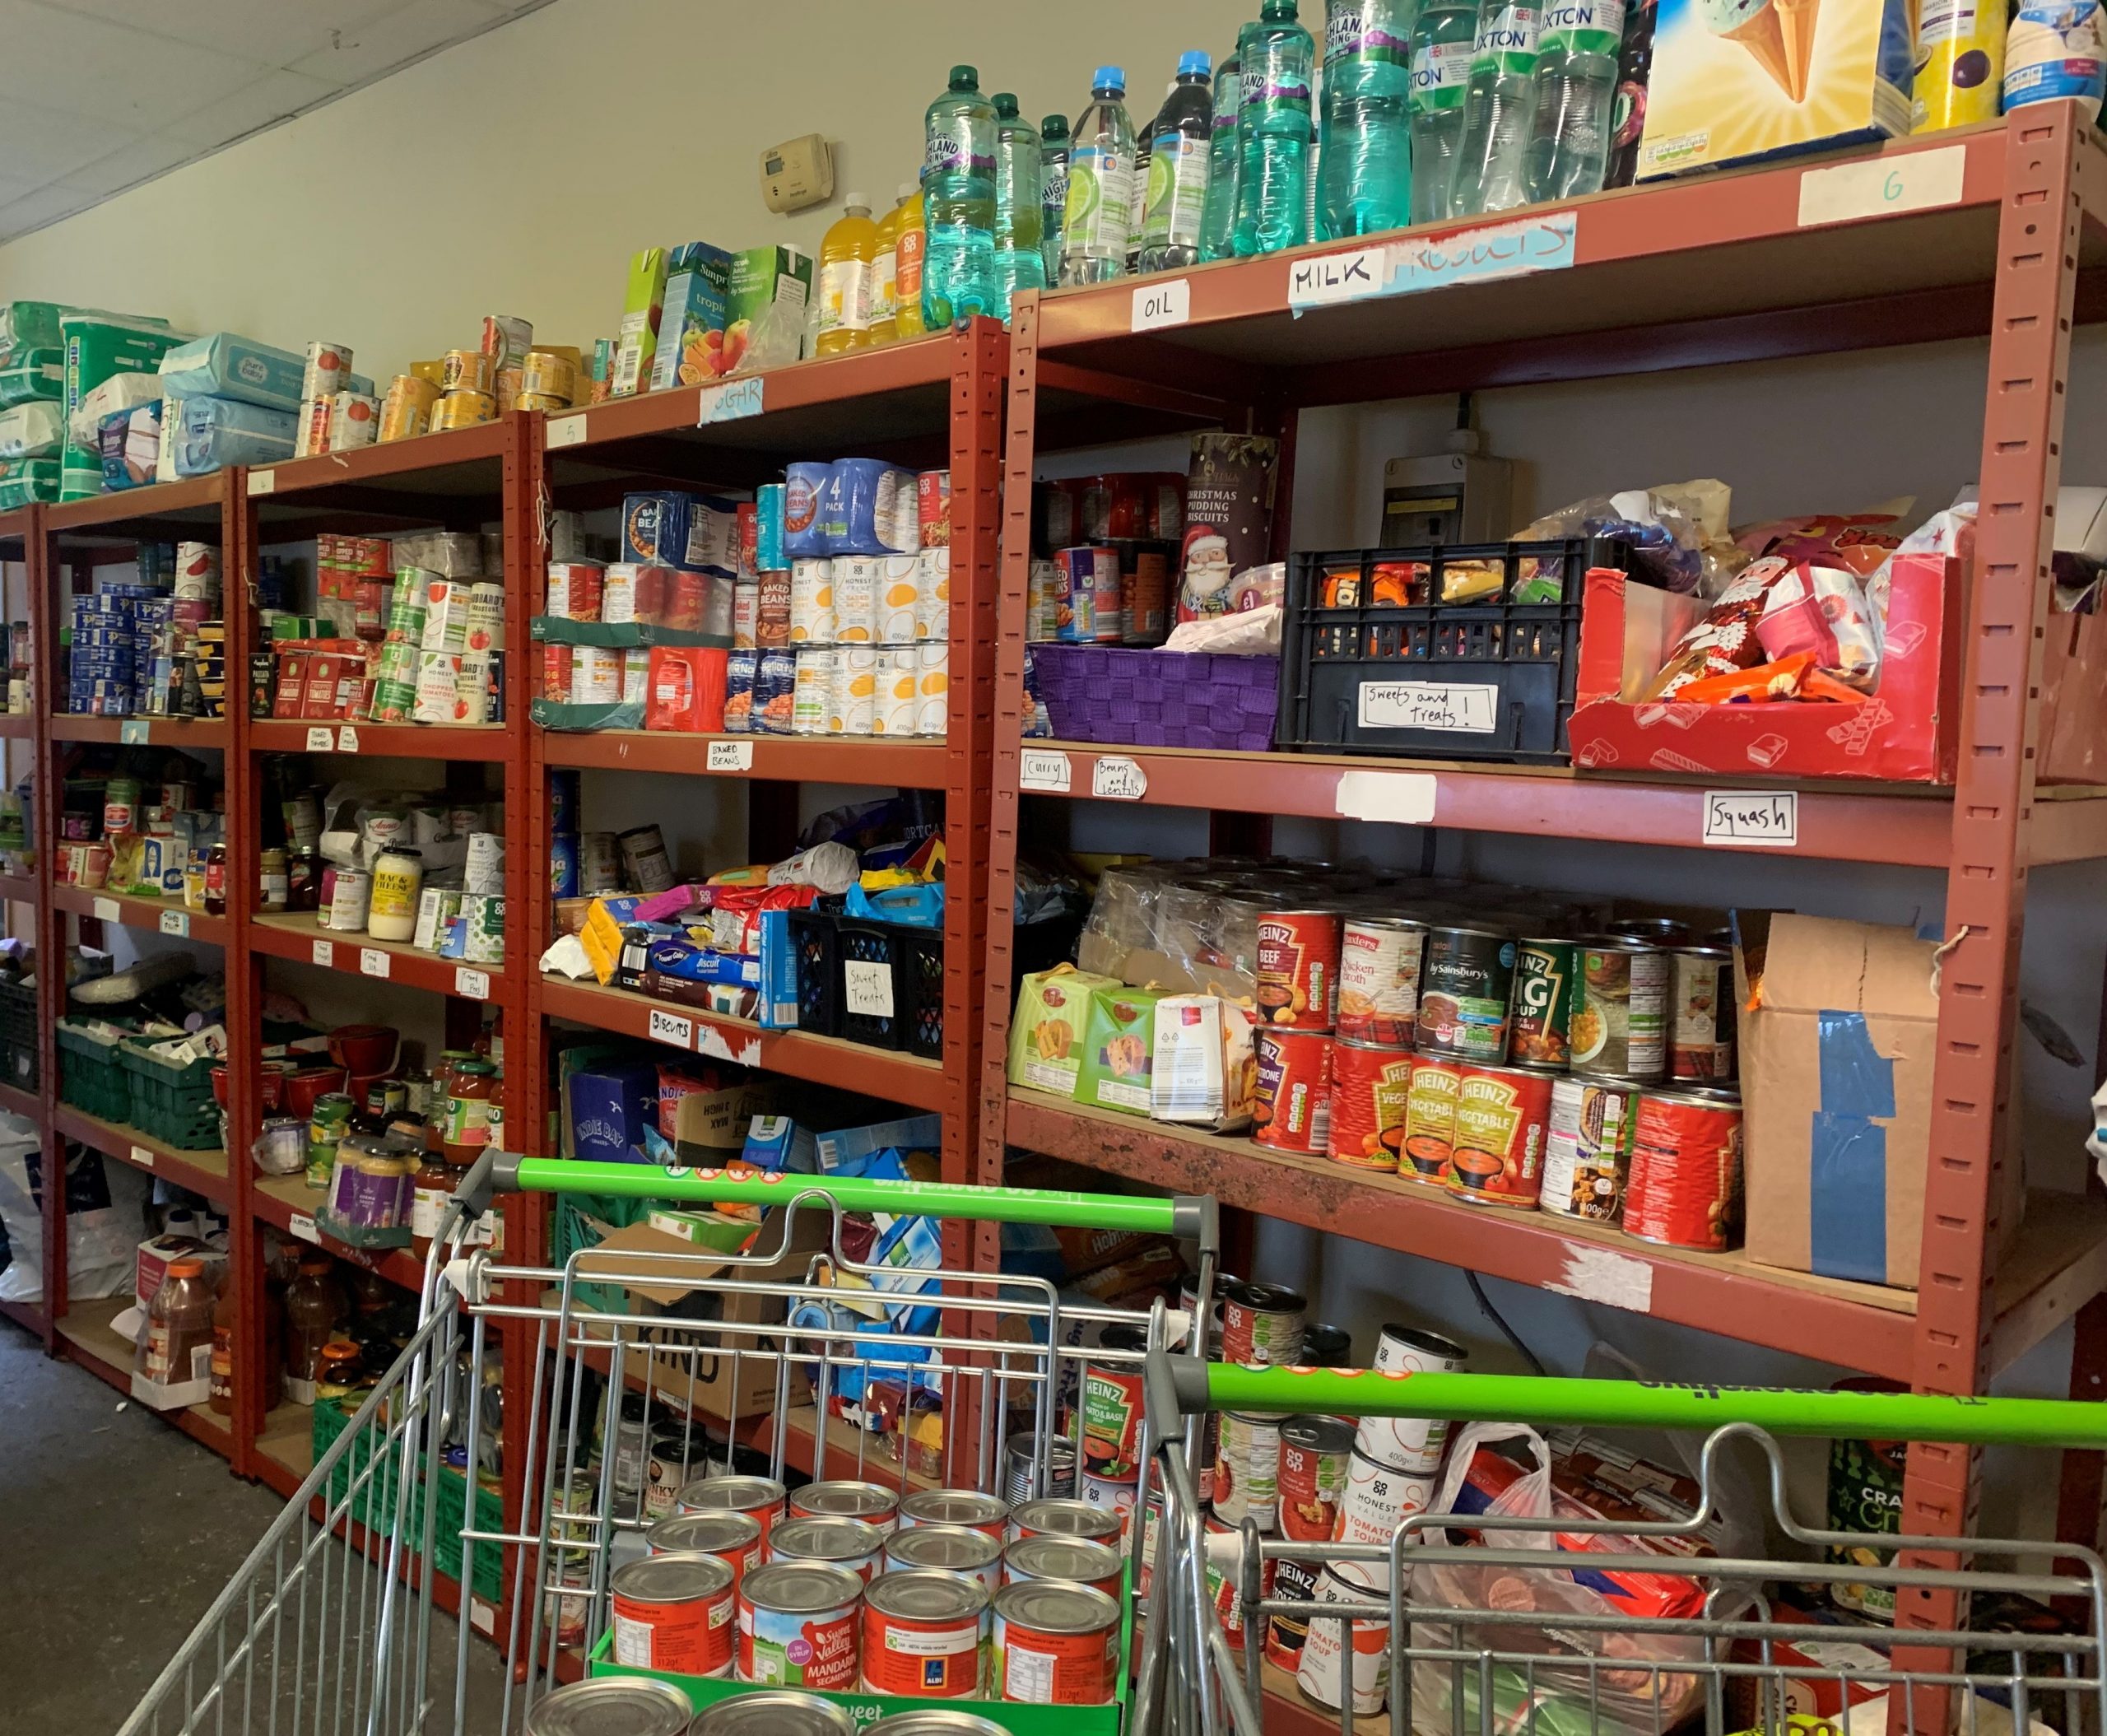 Foodbank shelves of food and shopping trolley